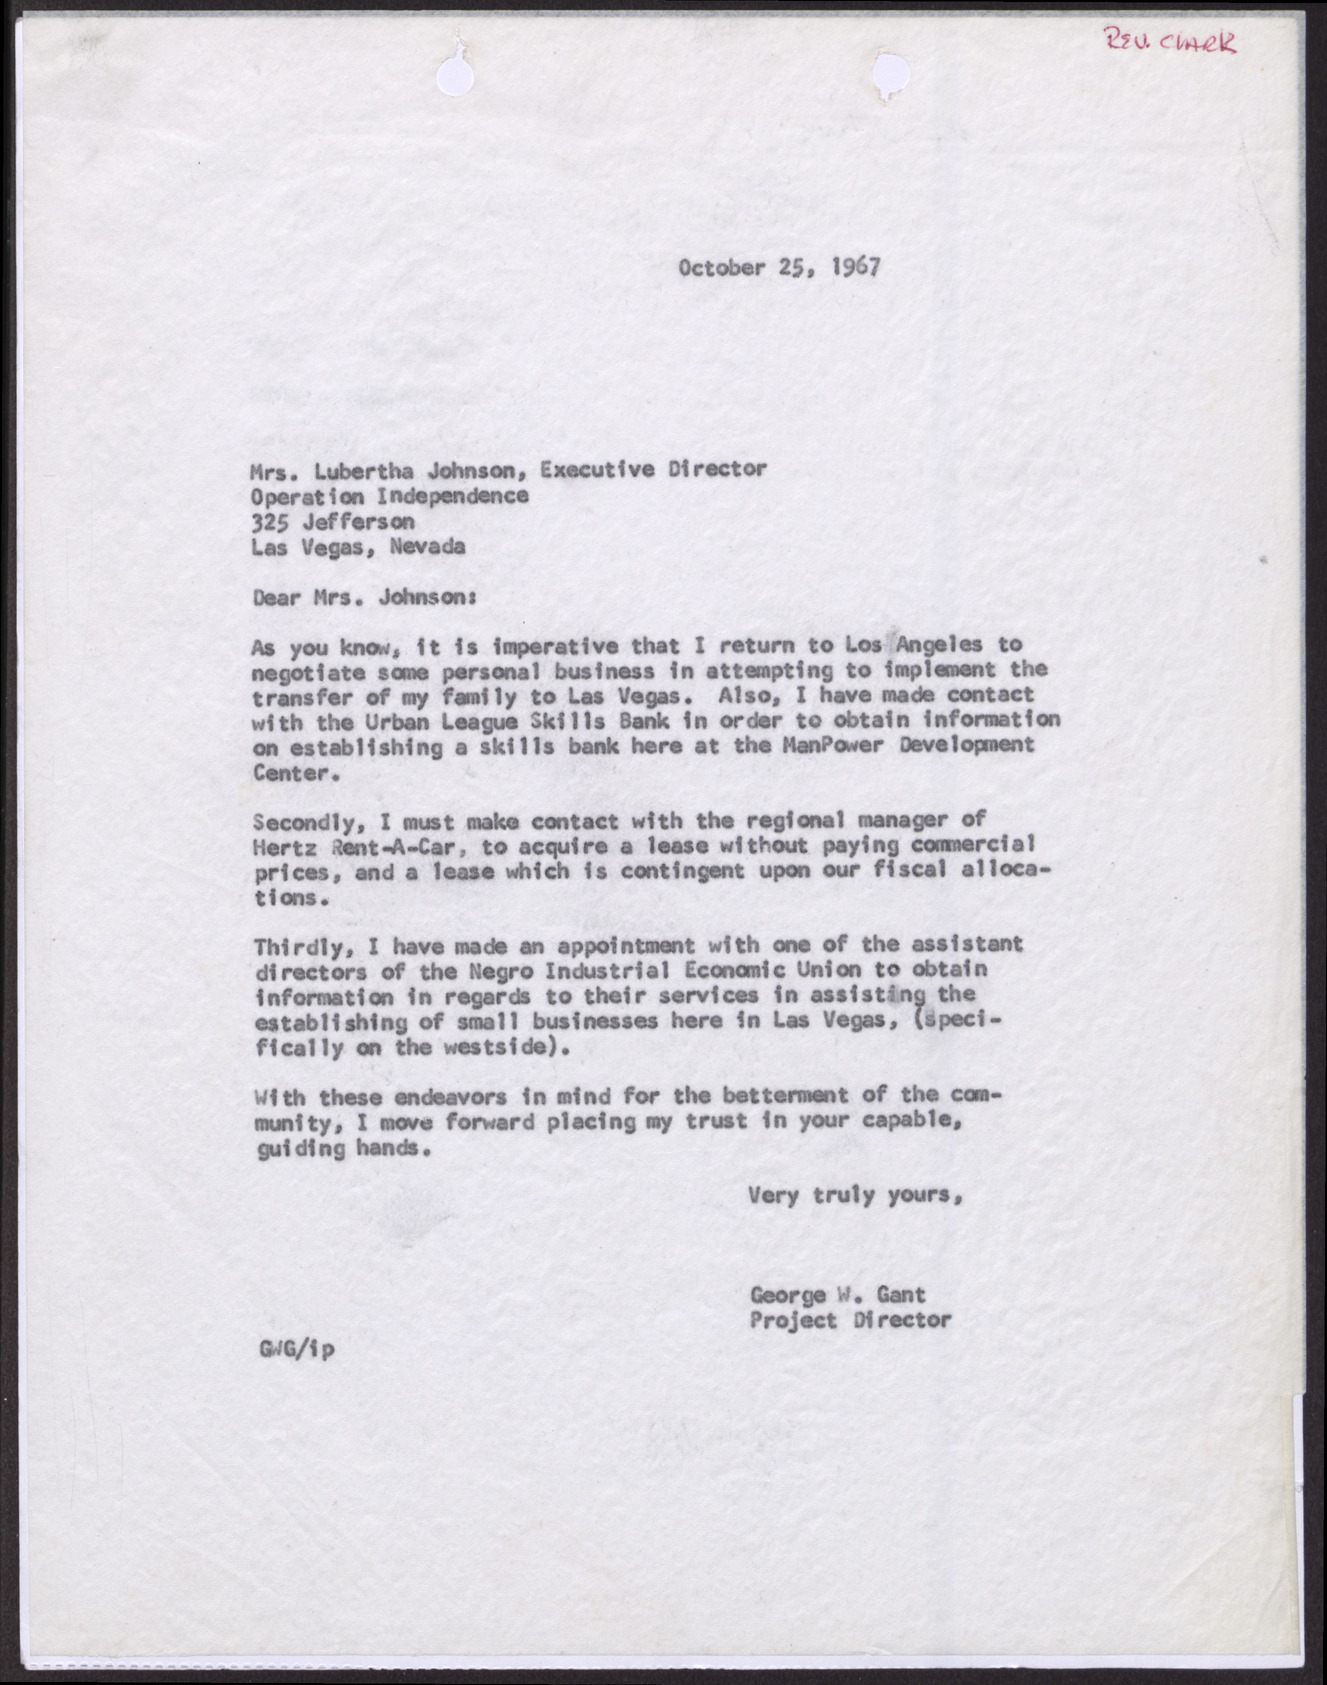 Letter to Mrs. Lubertha Johnson from George W. Gant, October 25, 1967